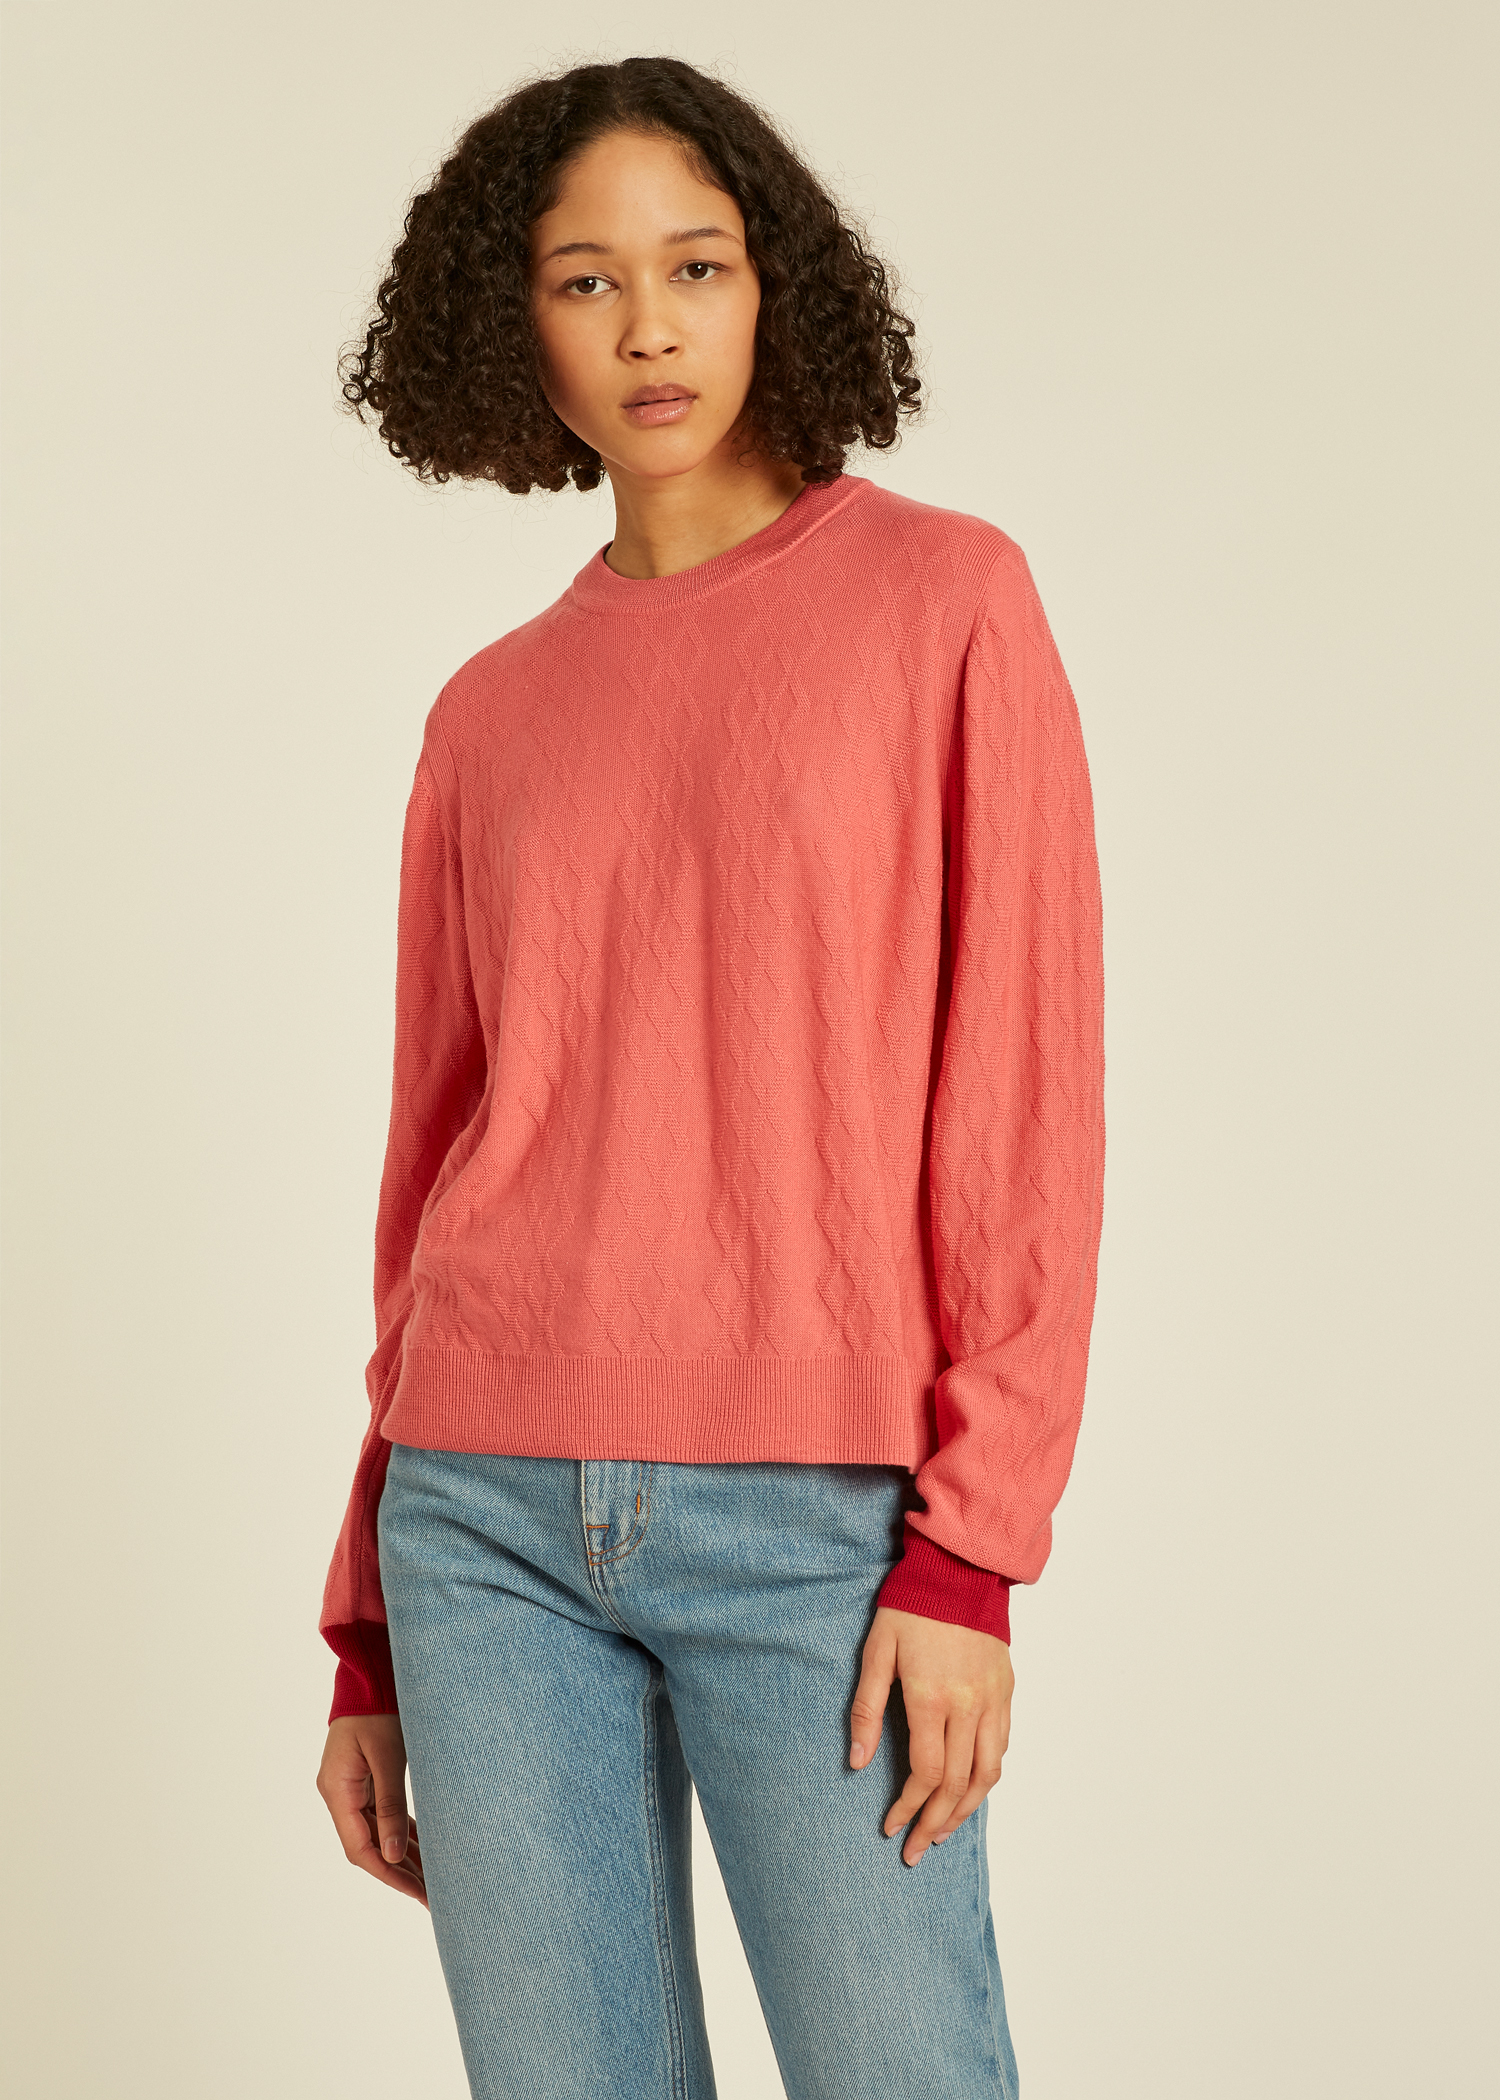 Women's Coral Diamond Pattern Sweater With Contrast Cuffs